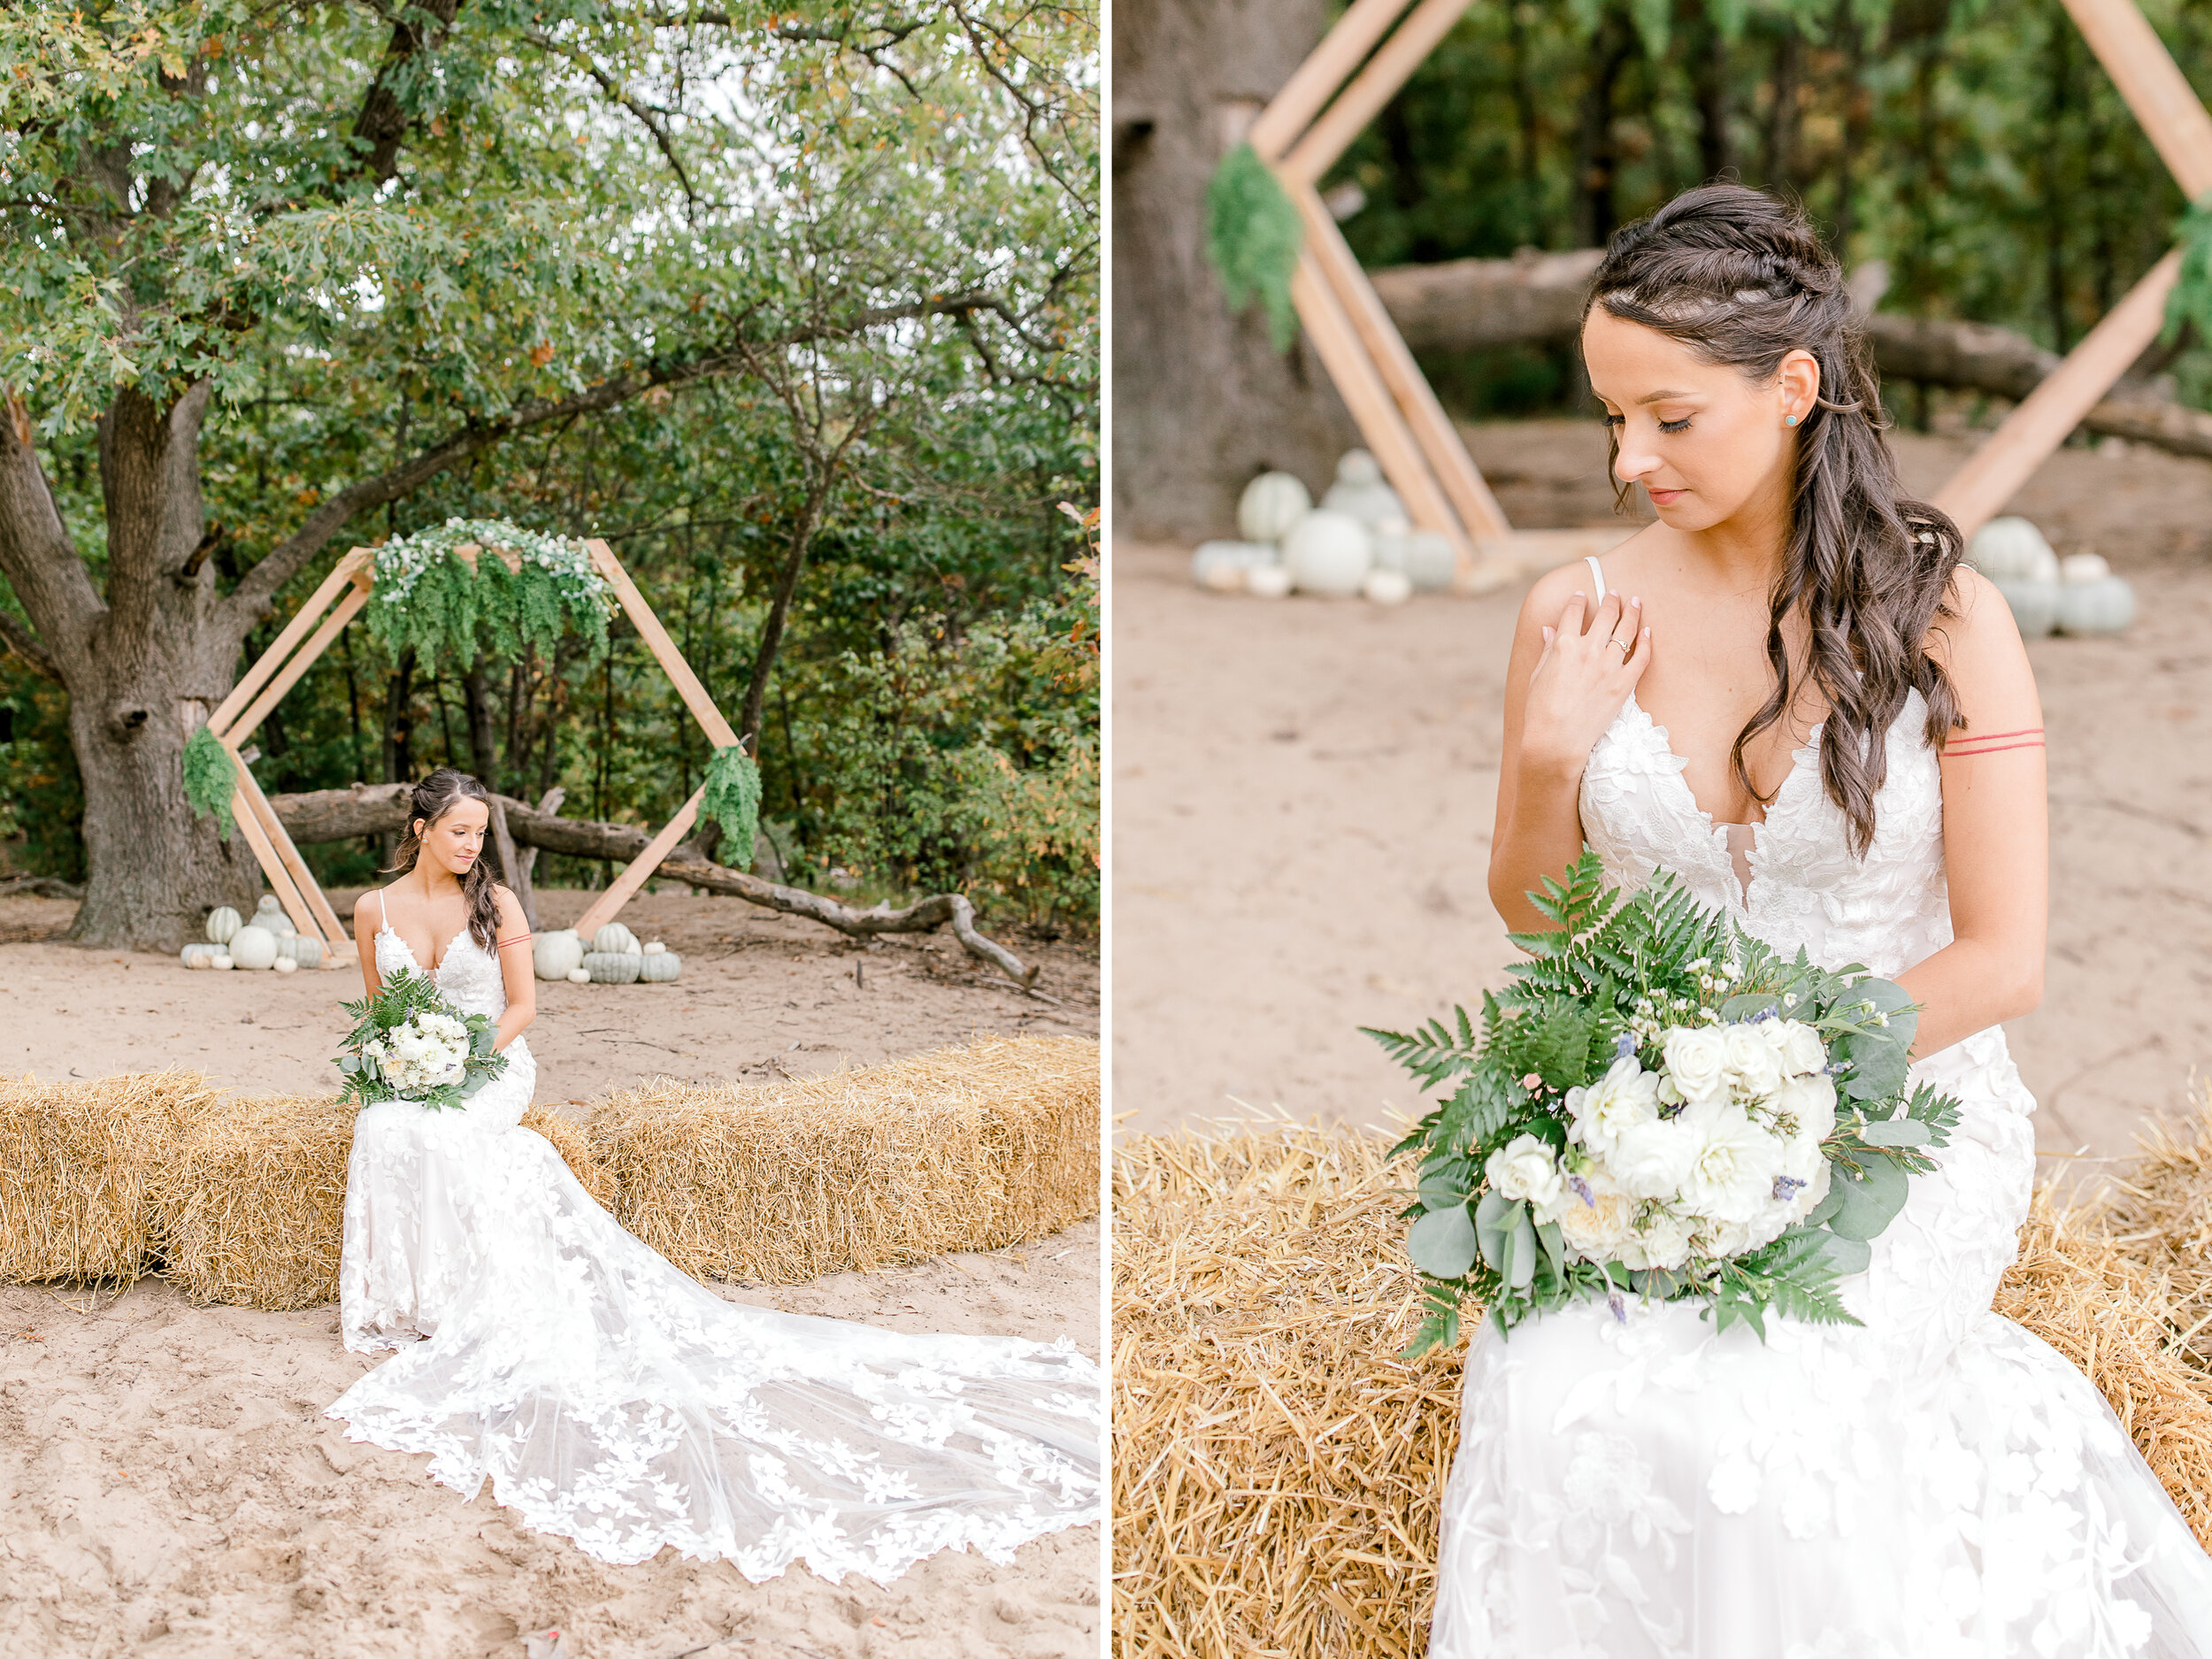 Intimate Fall Elopement in the Woods | Light &amp; Airy West Michigan Wedding Photographer